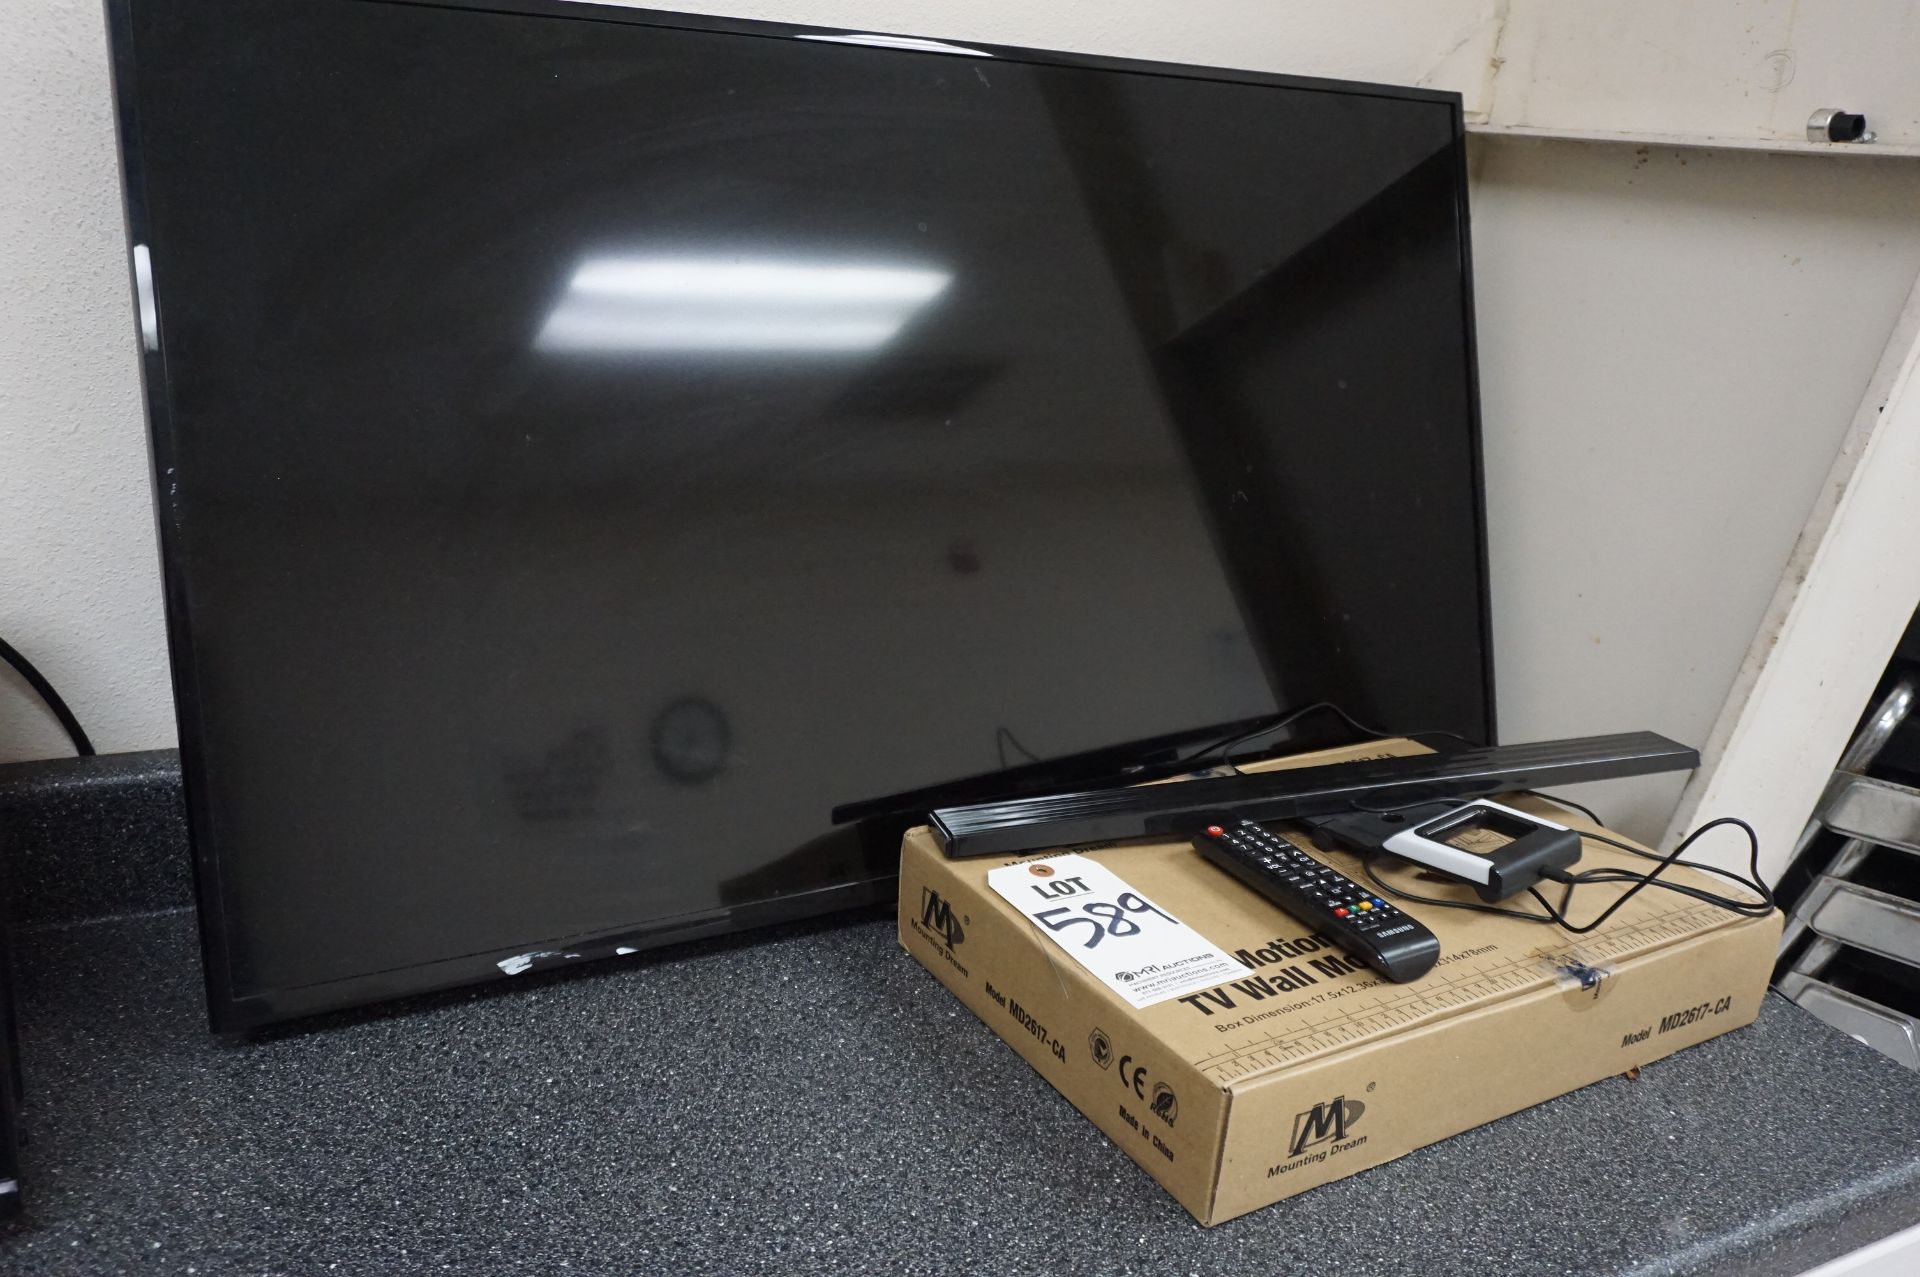 SAMSUNG FLAT SCREEN TV MODEL UN43NU6950F WITH WALL MOUNT IN BOX